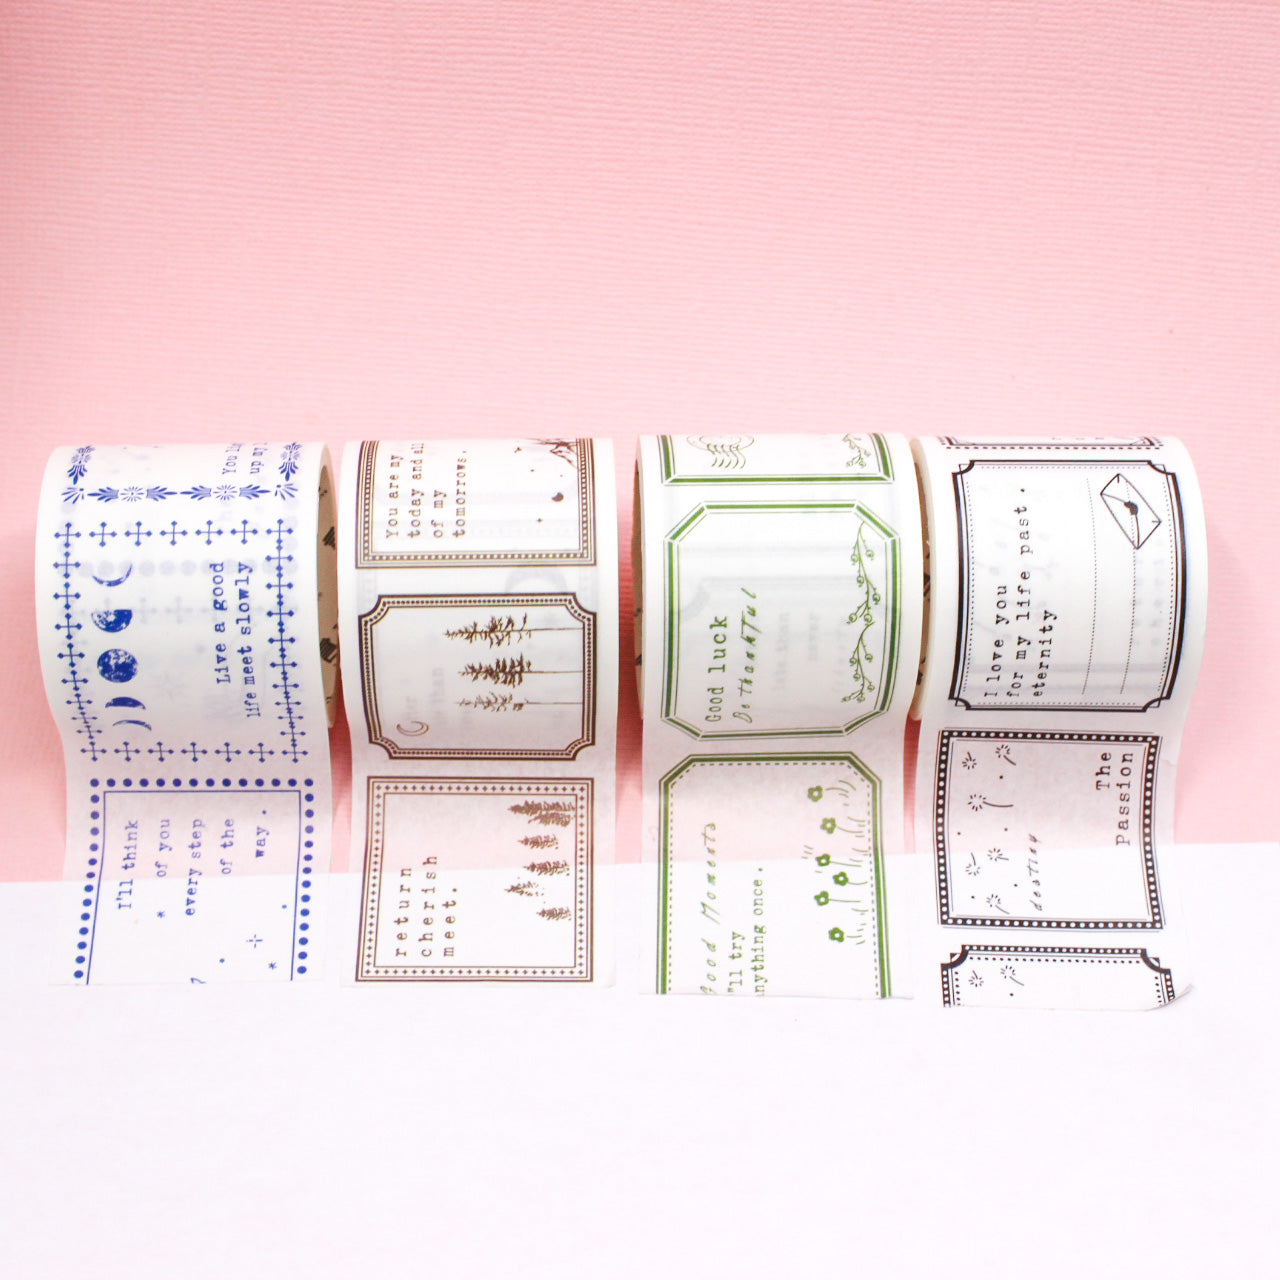 Brighten your diary with 'Wide Diary Encouraging Words' Washi Tape featuring inspiring phrases and vibrant colors. This tape is sold at BBB Supplies Craft Shop.